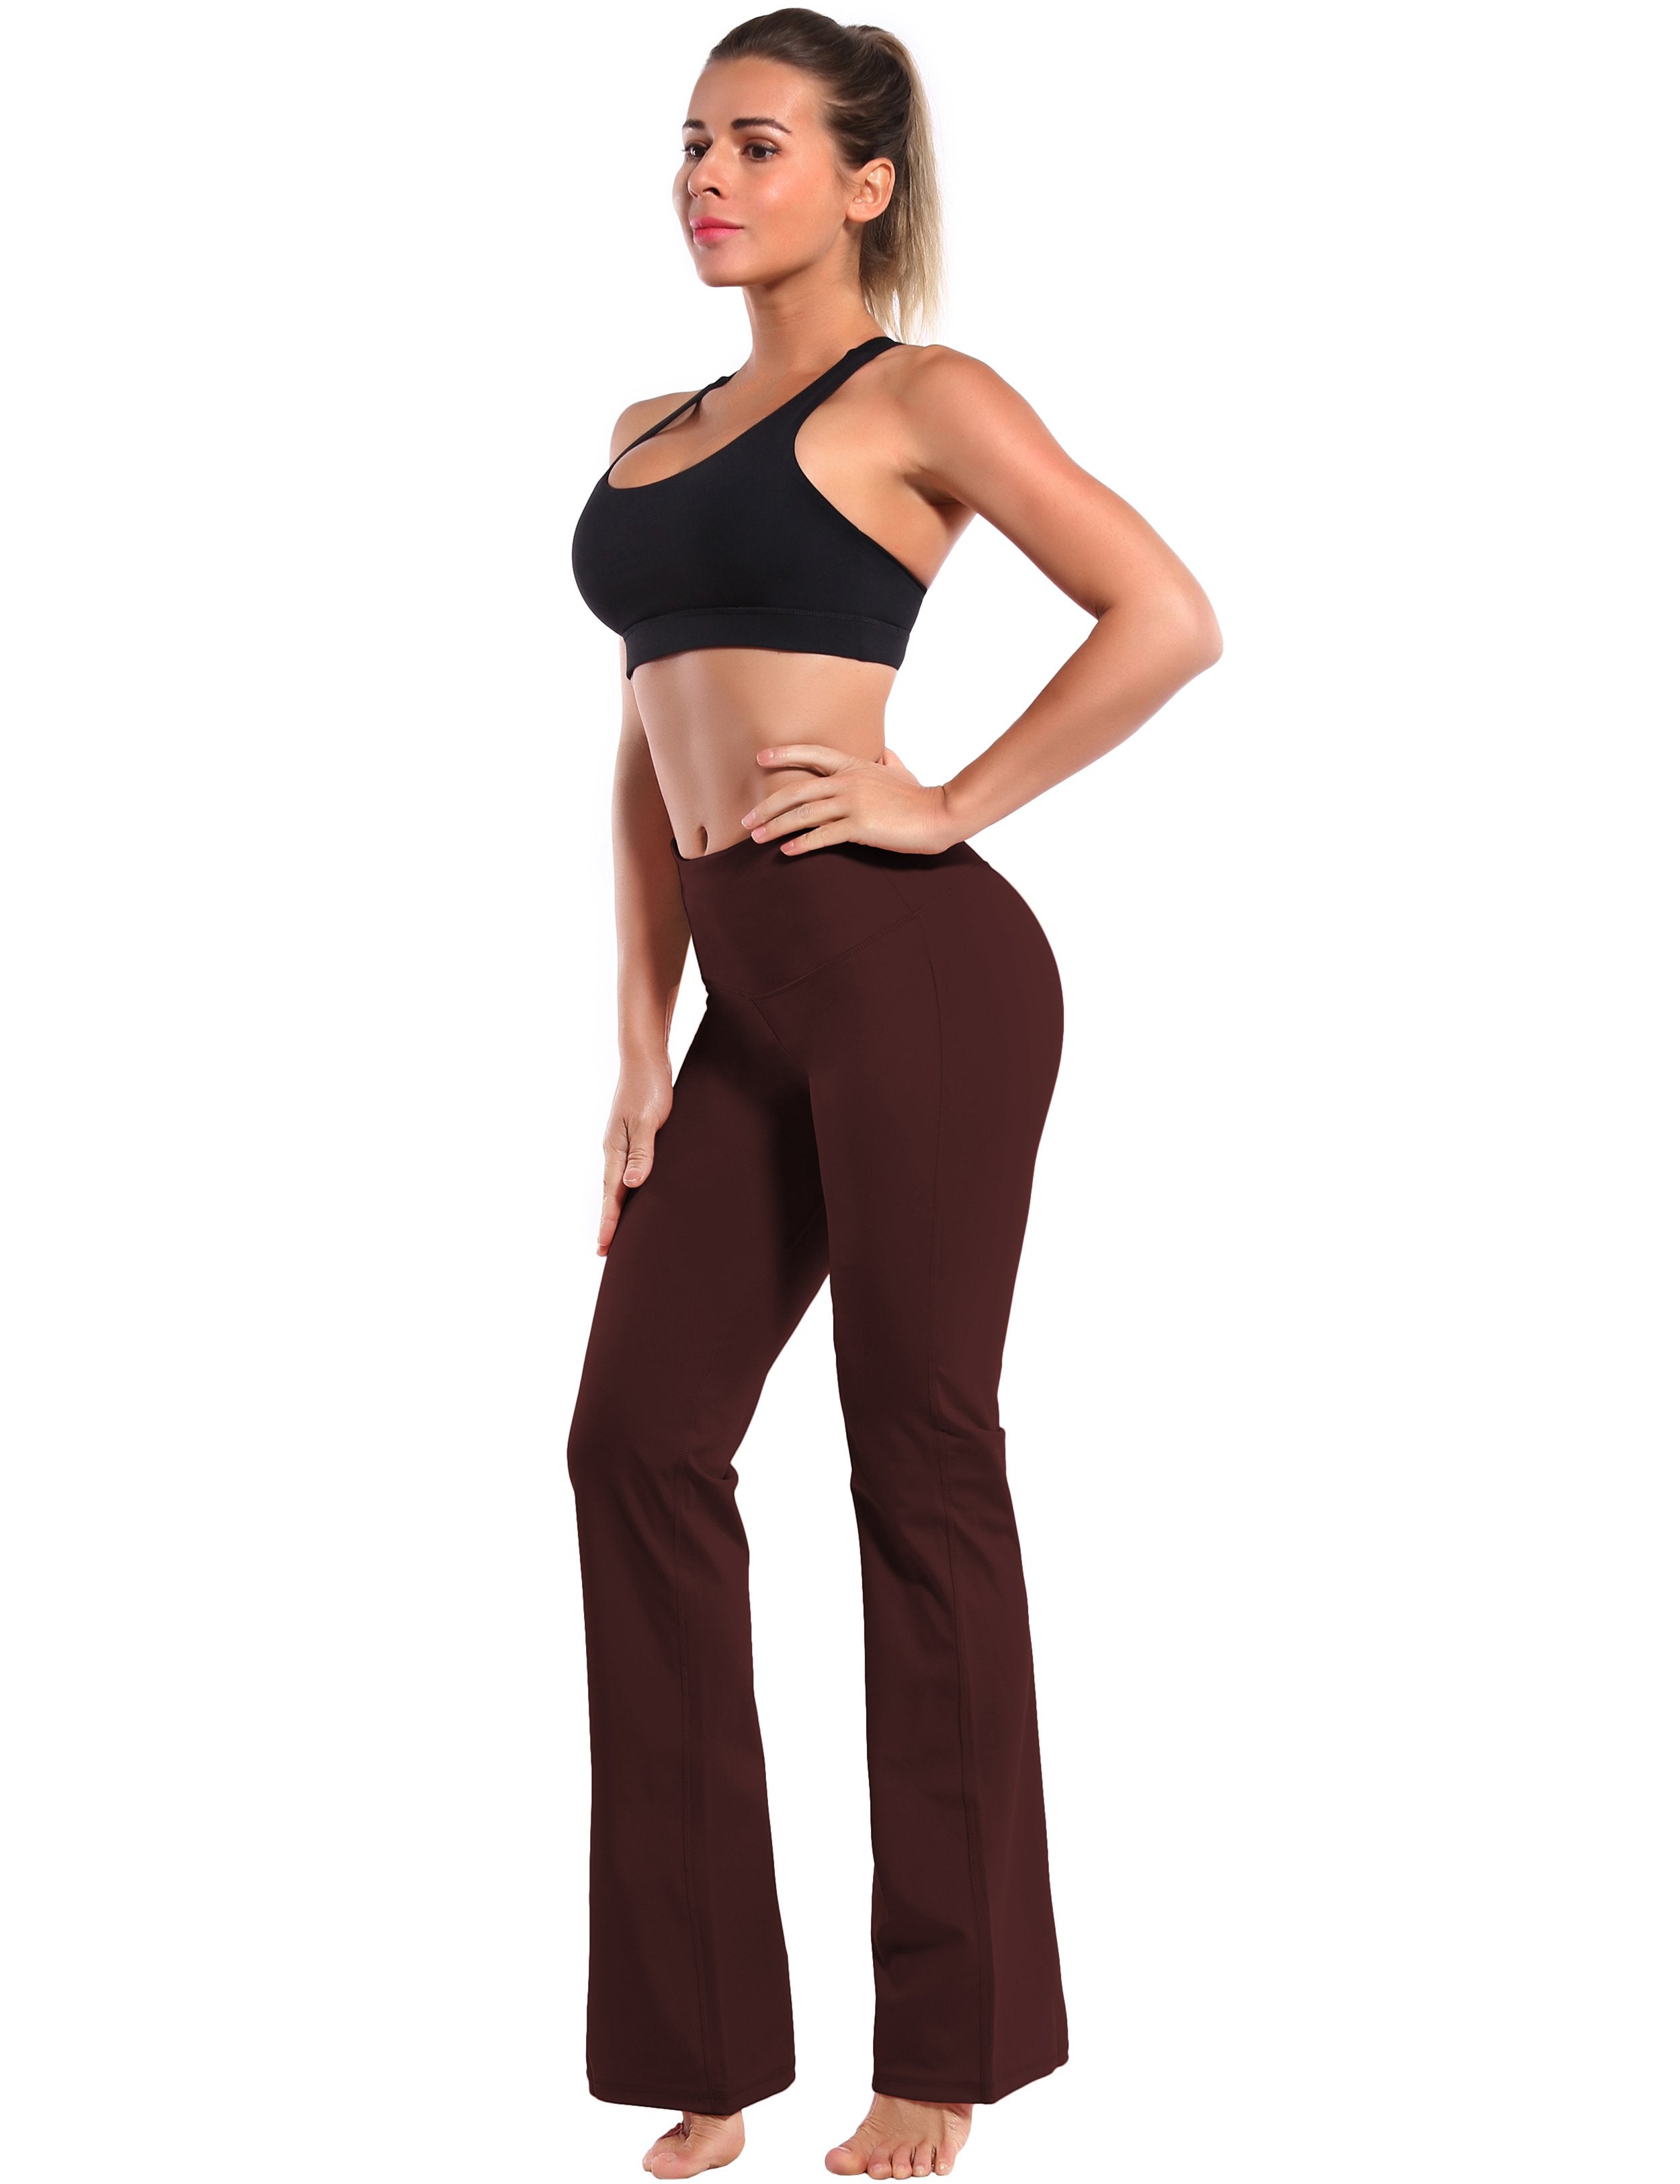 High Waist Bootcut Leggings Mahoganymaroon 75%Nylon/25%Spandex Fabric doesn't attract lint easily 4-way stretch No see-through Moisture-wicking Tummy control Inner pocket Five lengths